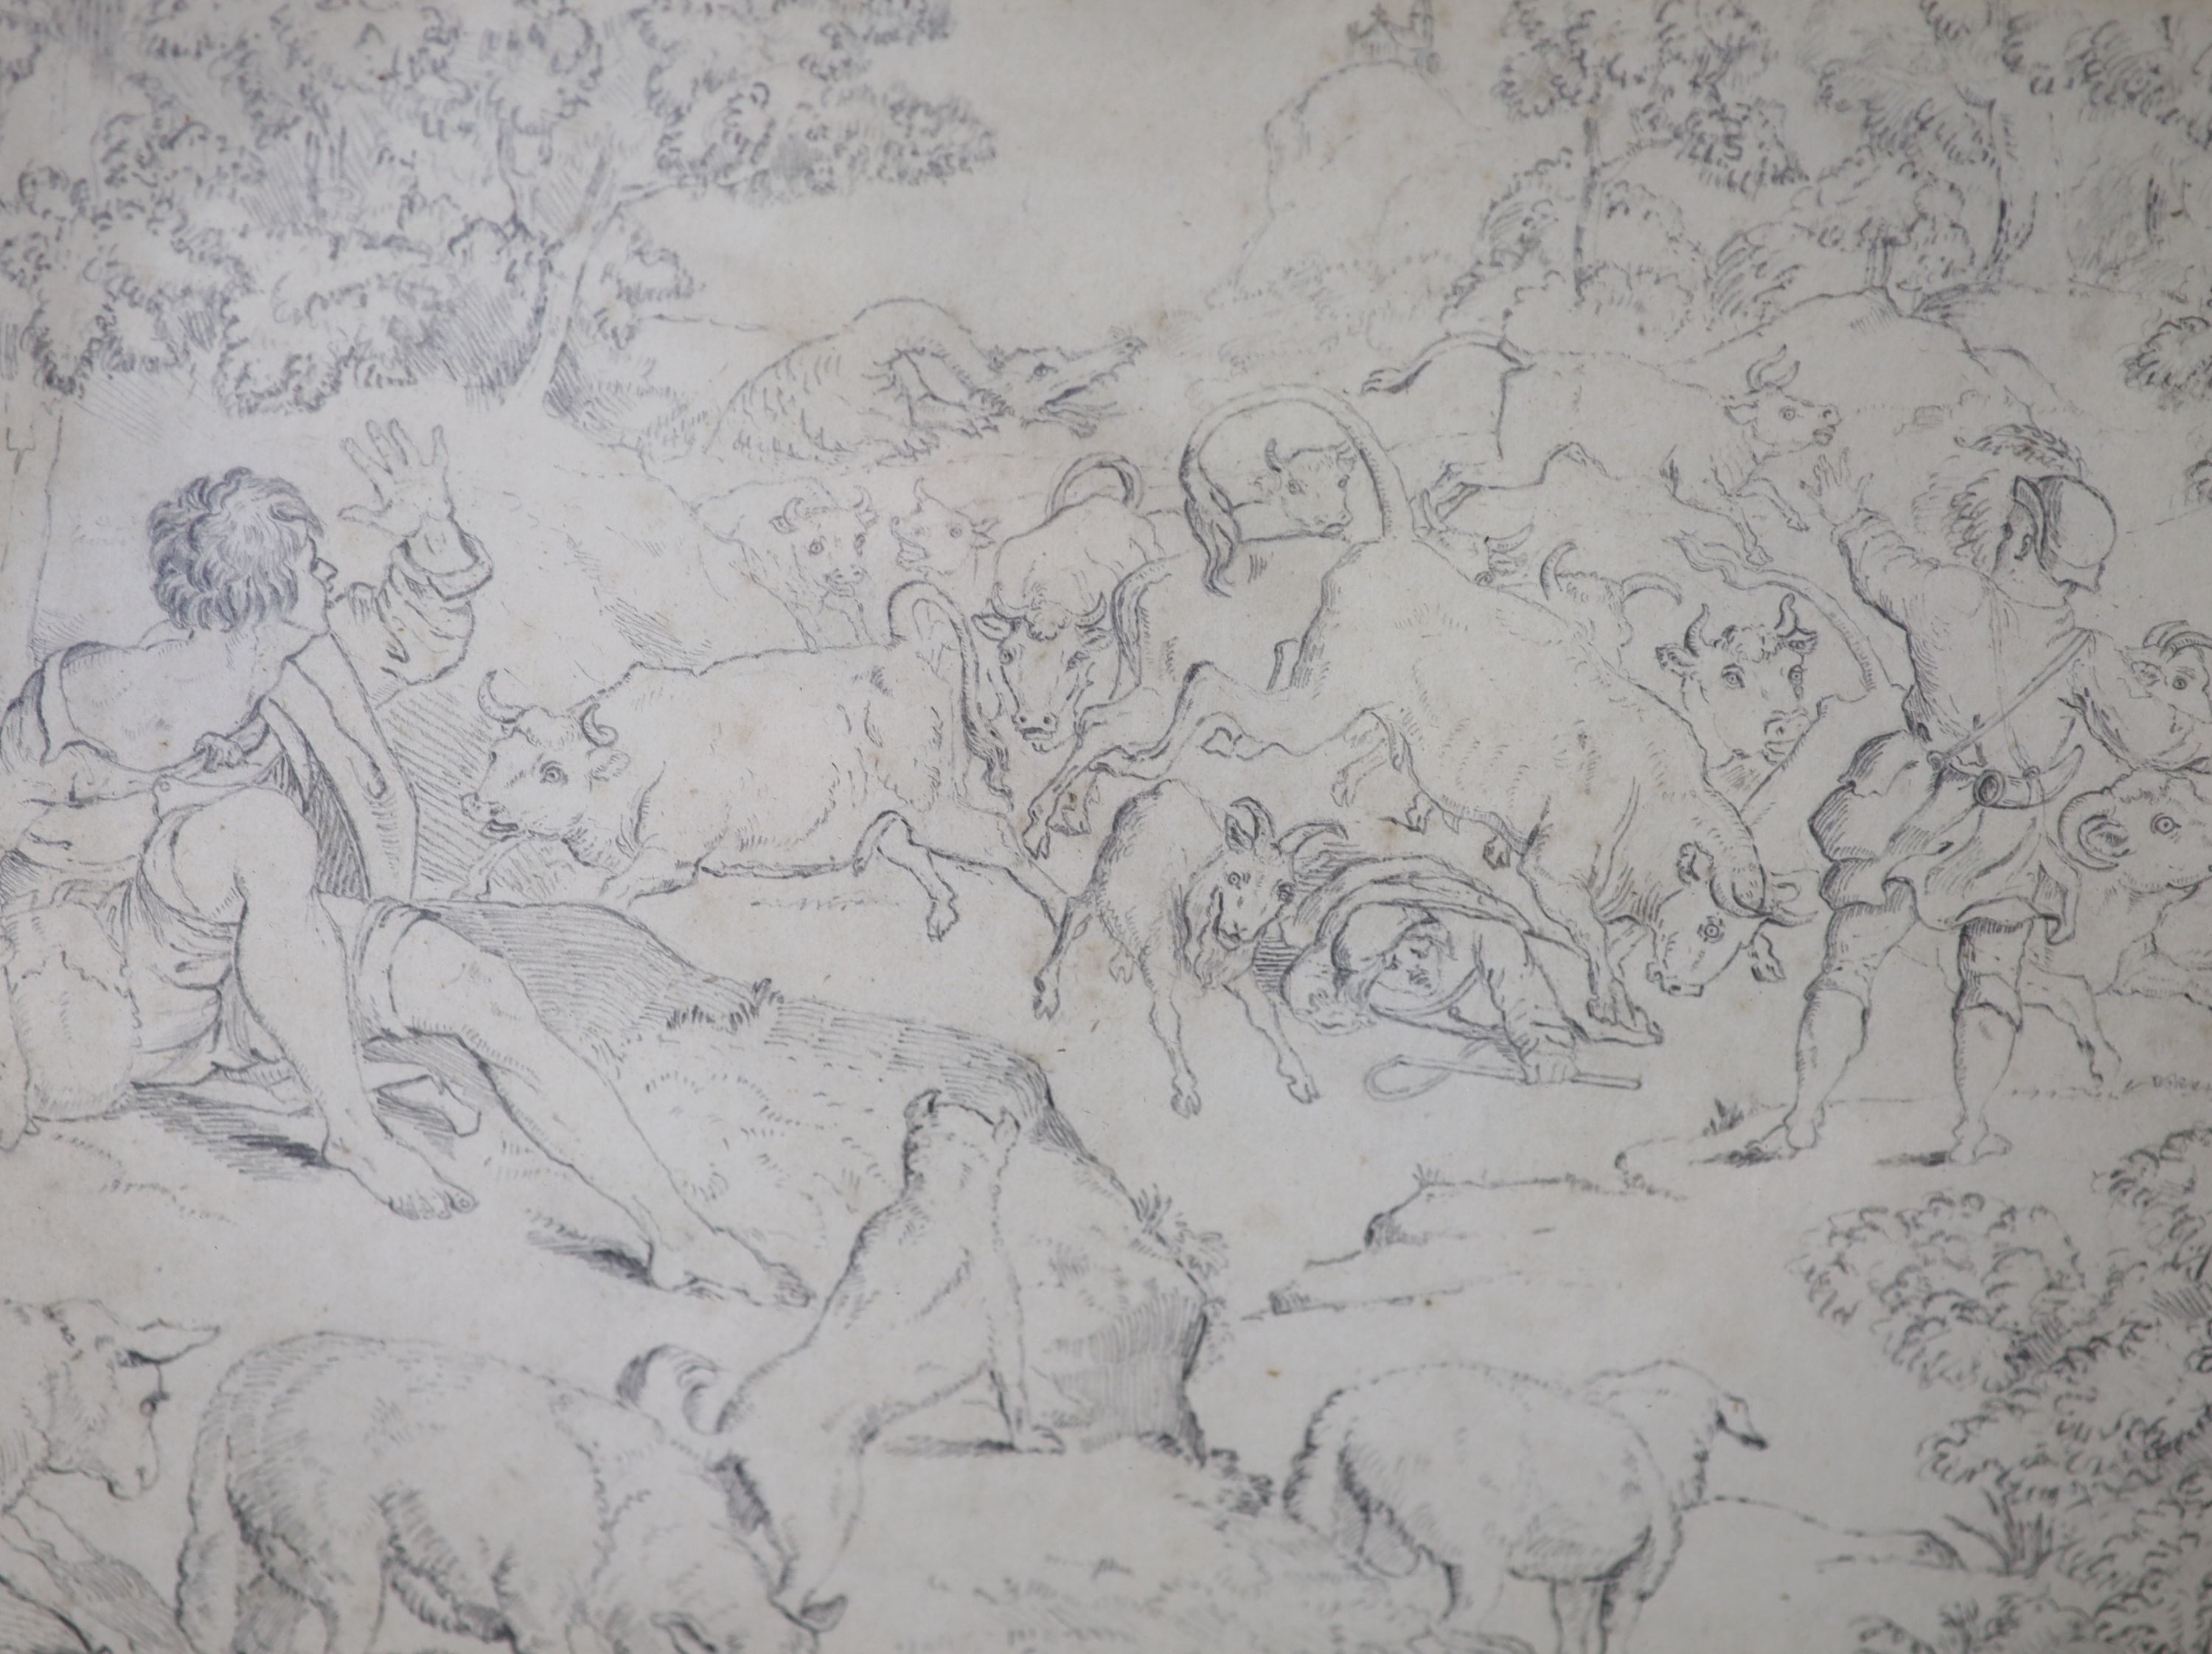 A trio of European figural group studies in the classical style, Romantically presented soldiers on horseback together with a study of figures and livestock fleeing from a dragon, pencil on paper, 16 x 22 cm (3).